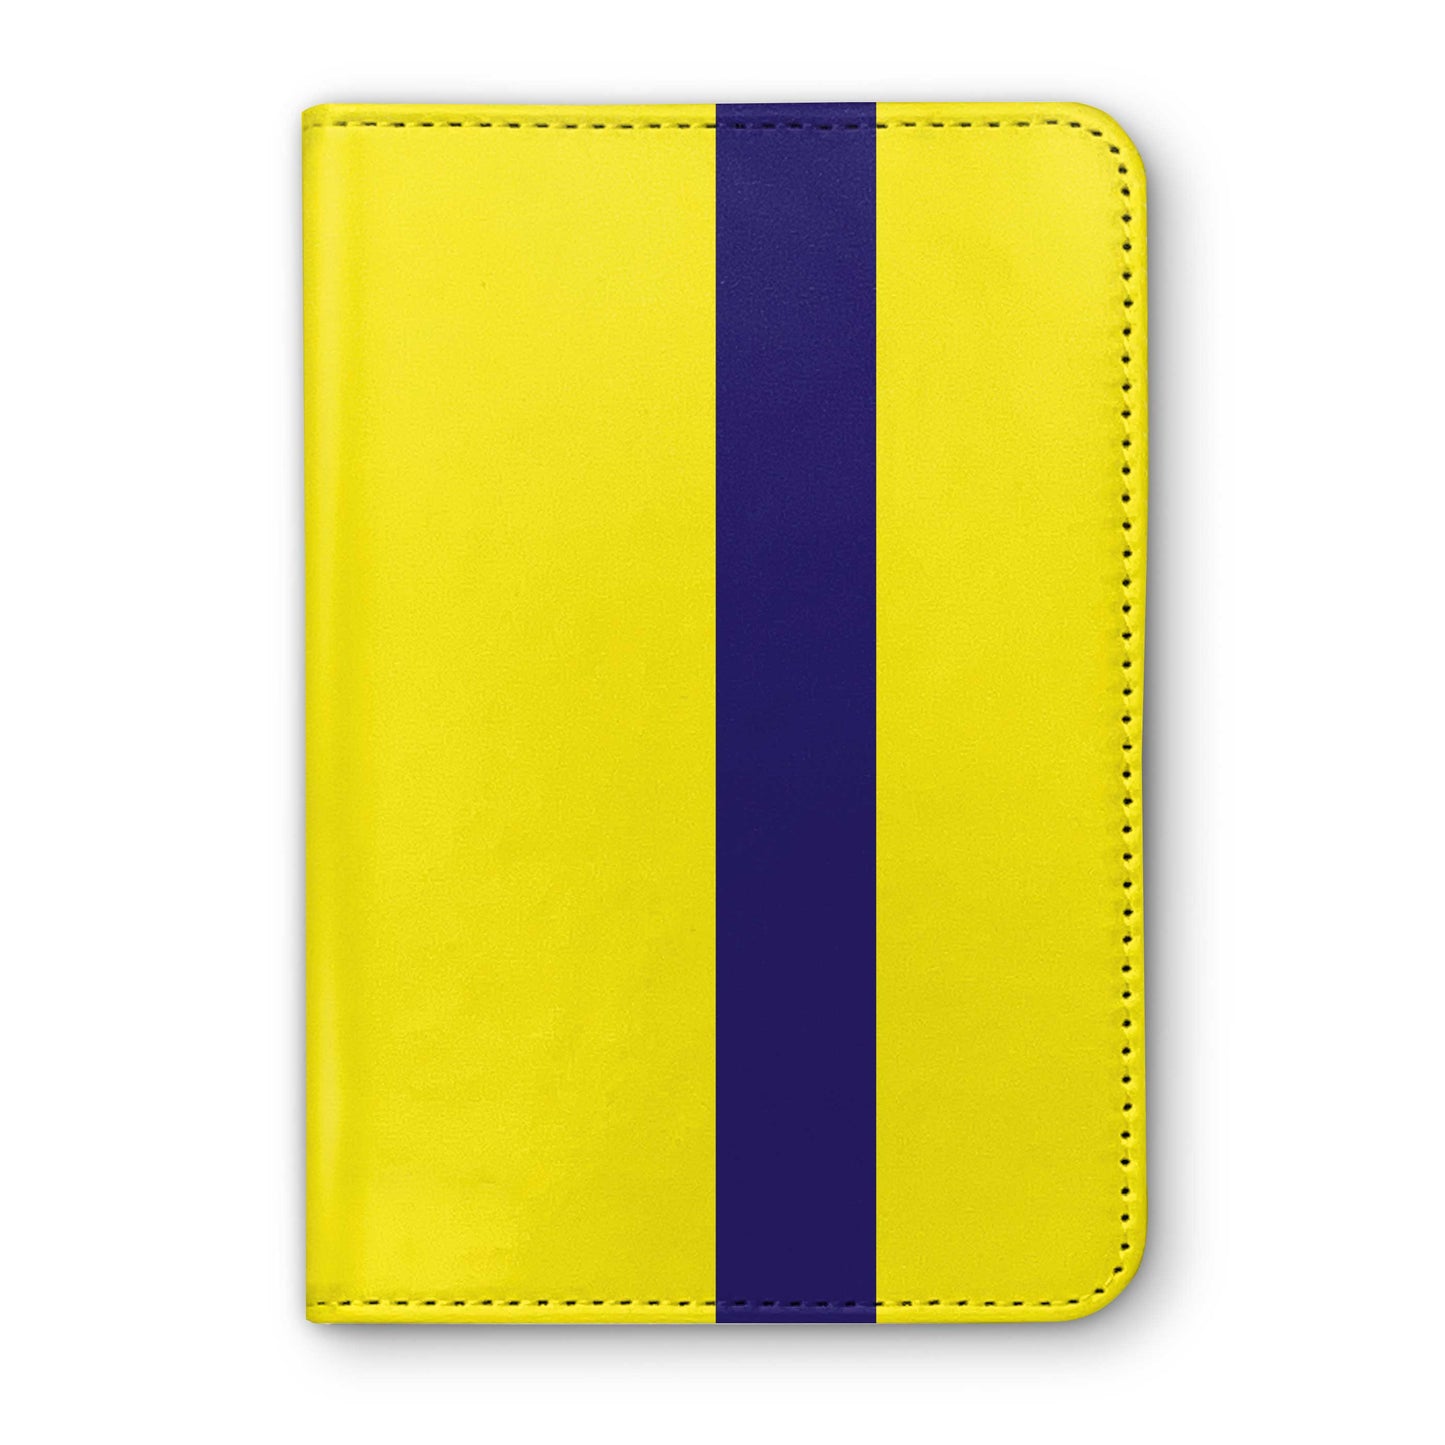 Taylor And O'Dwyer Horse Racing Passport Holder - Hacked Up Horse Racing Gifts